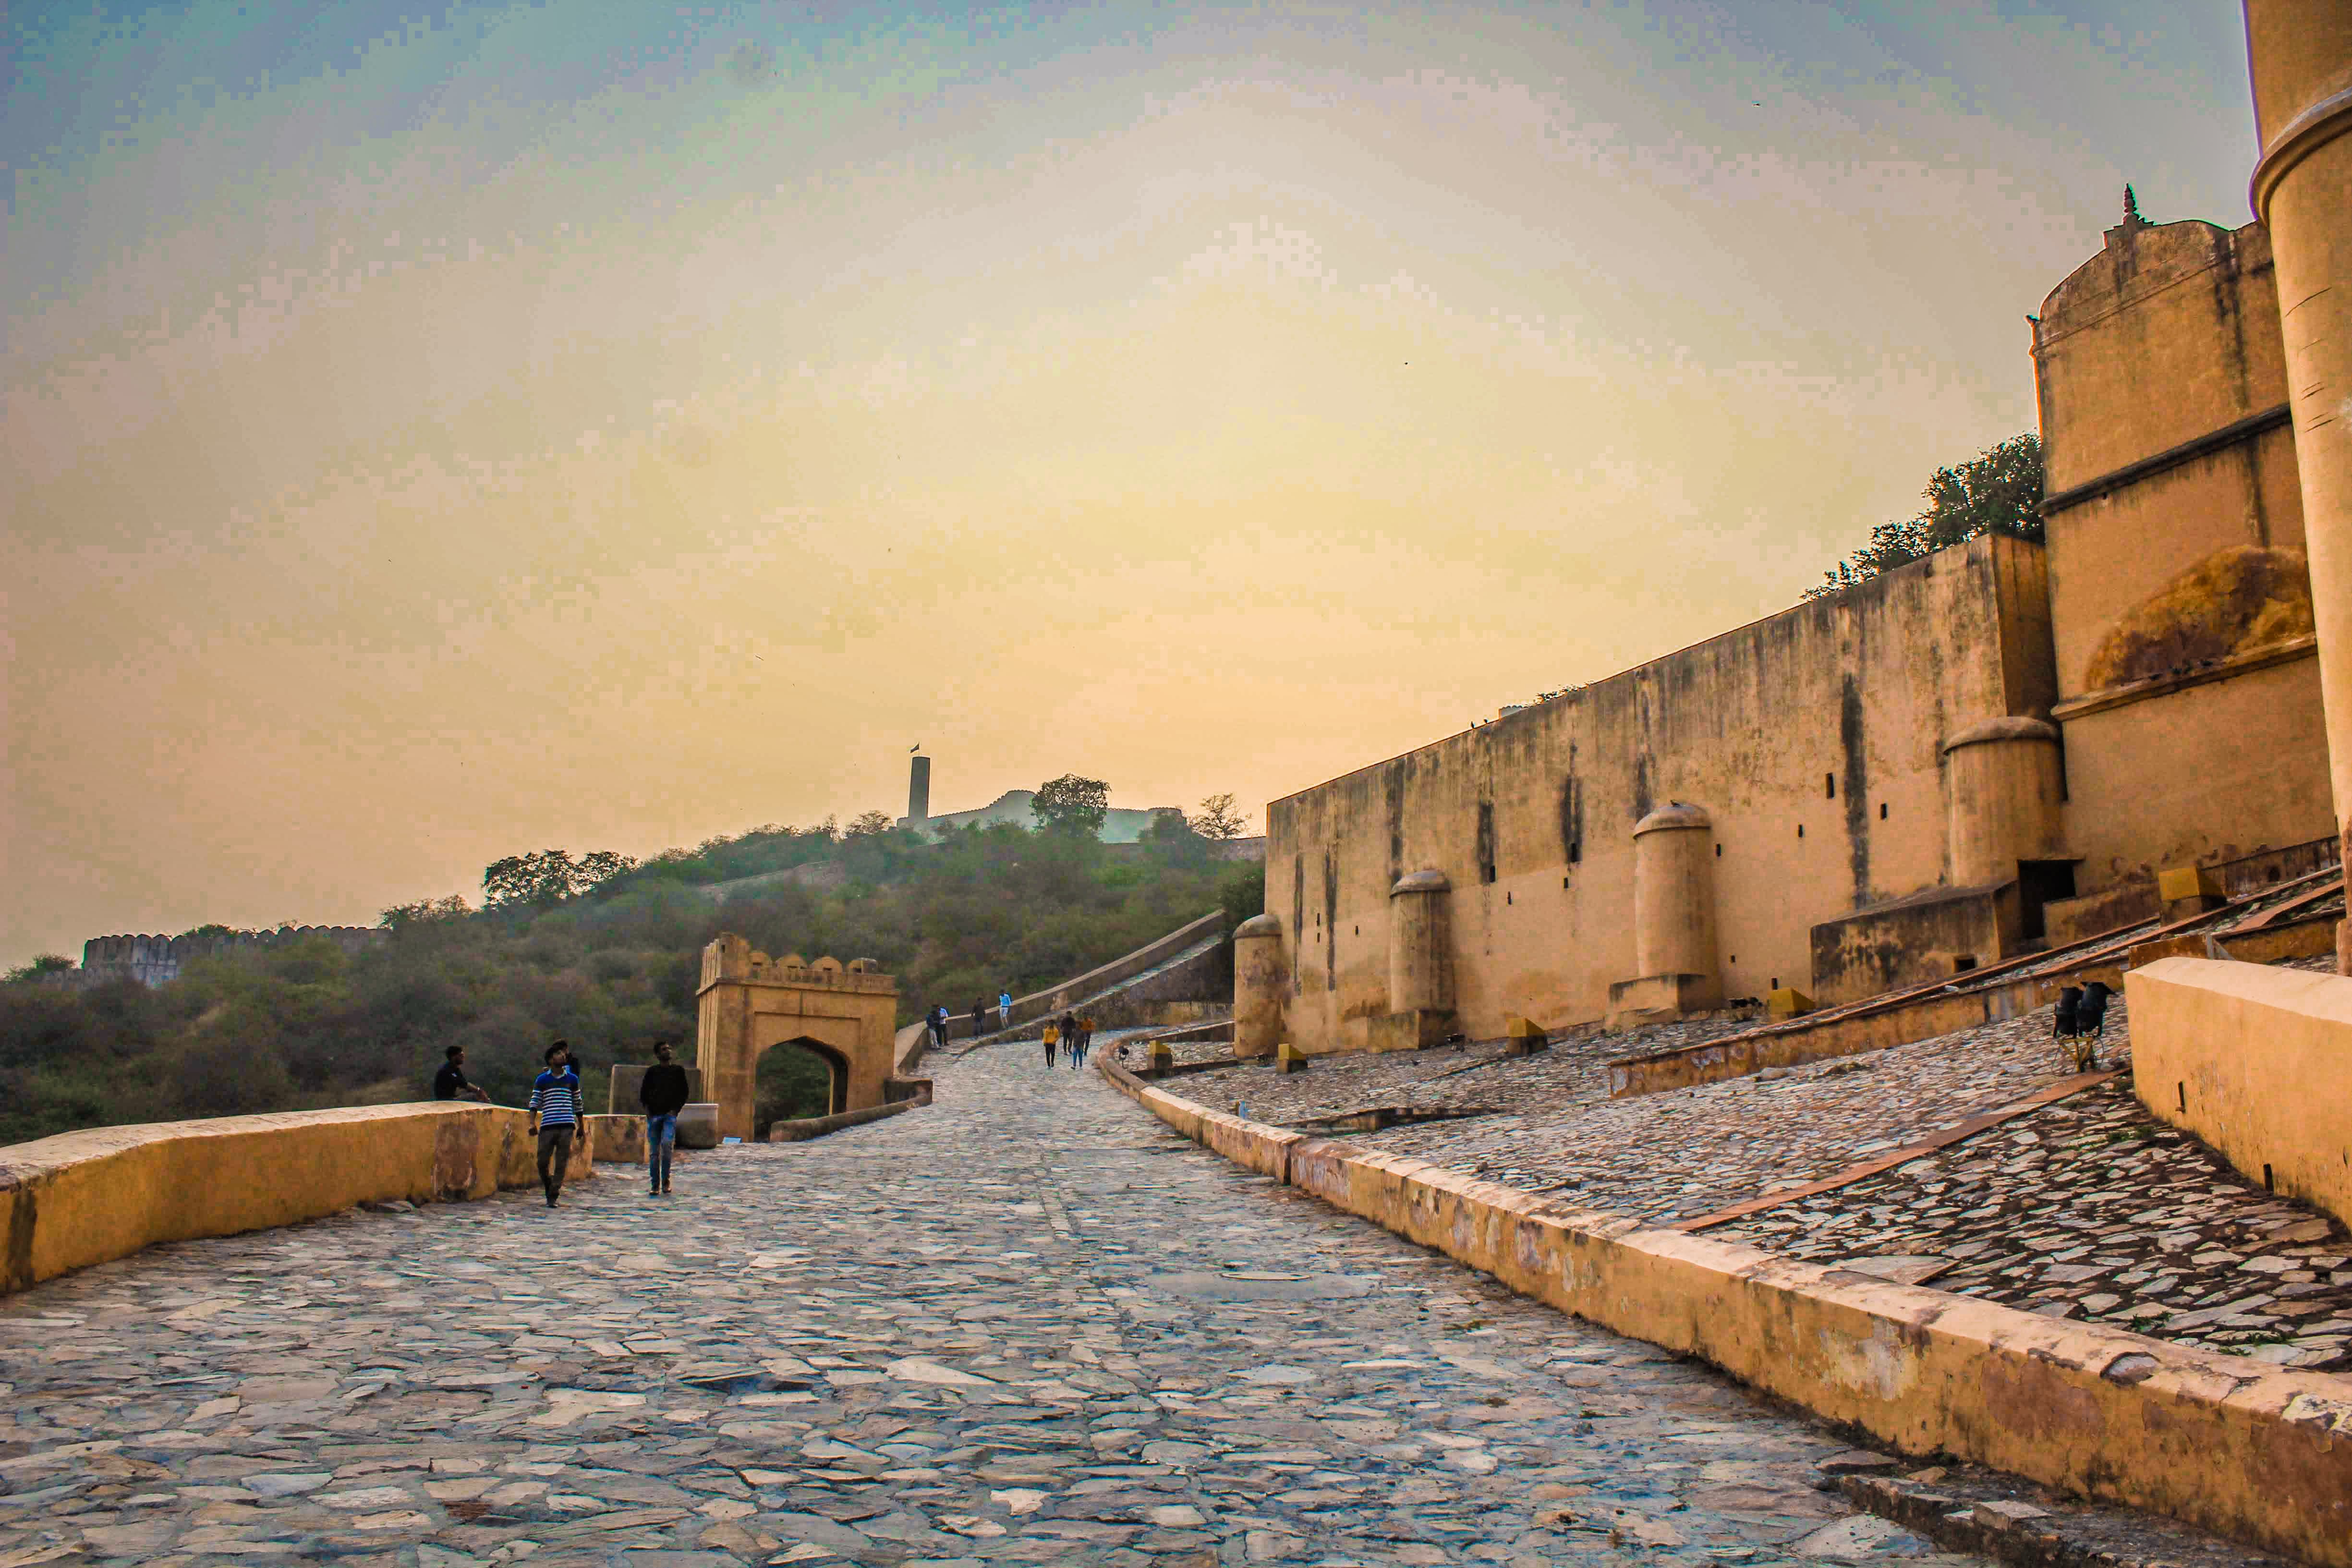 Cobbled pathways surrounding the Amer Fort